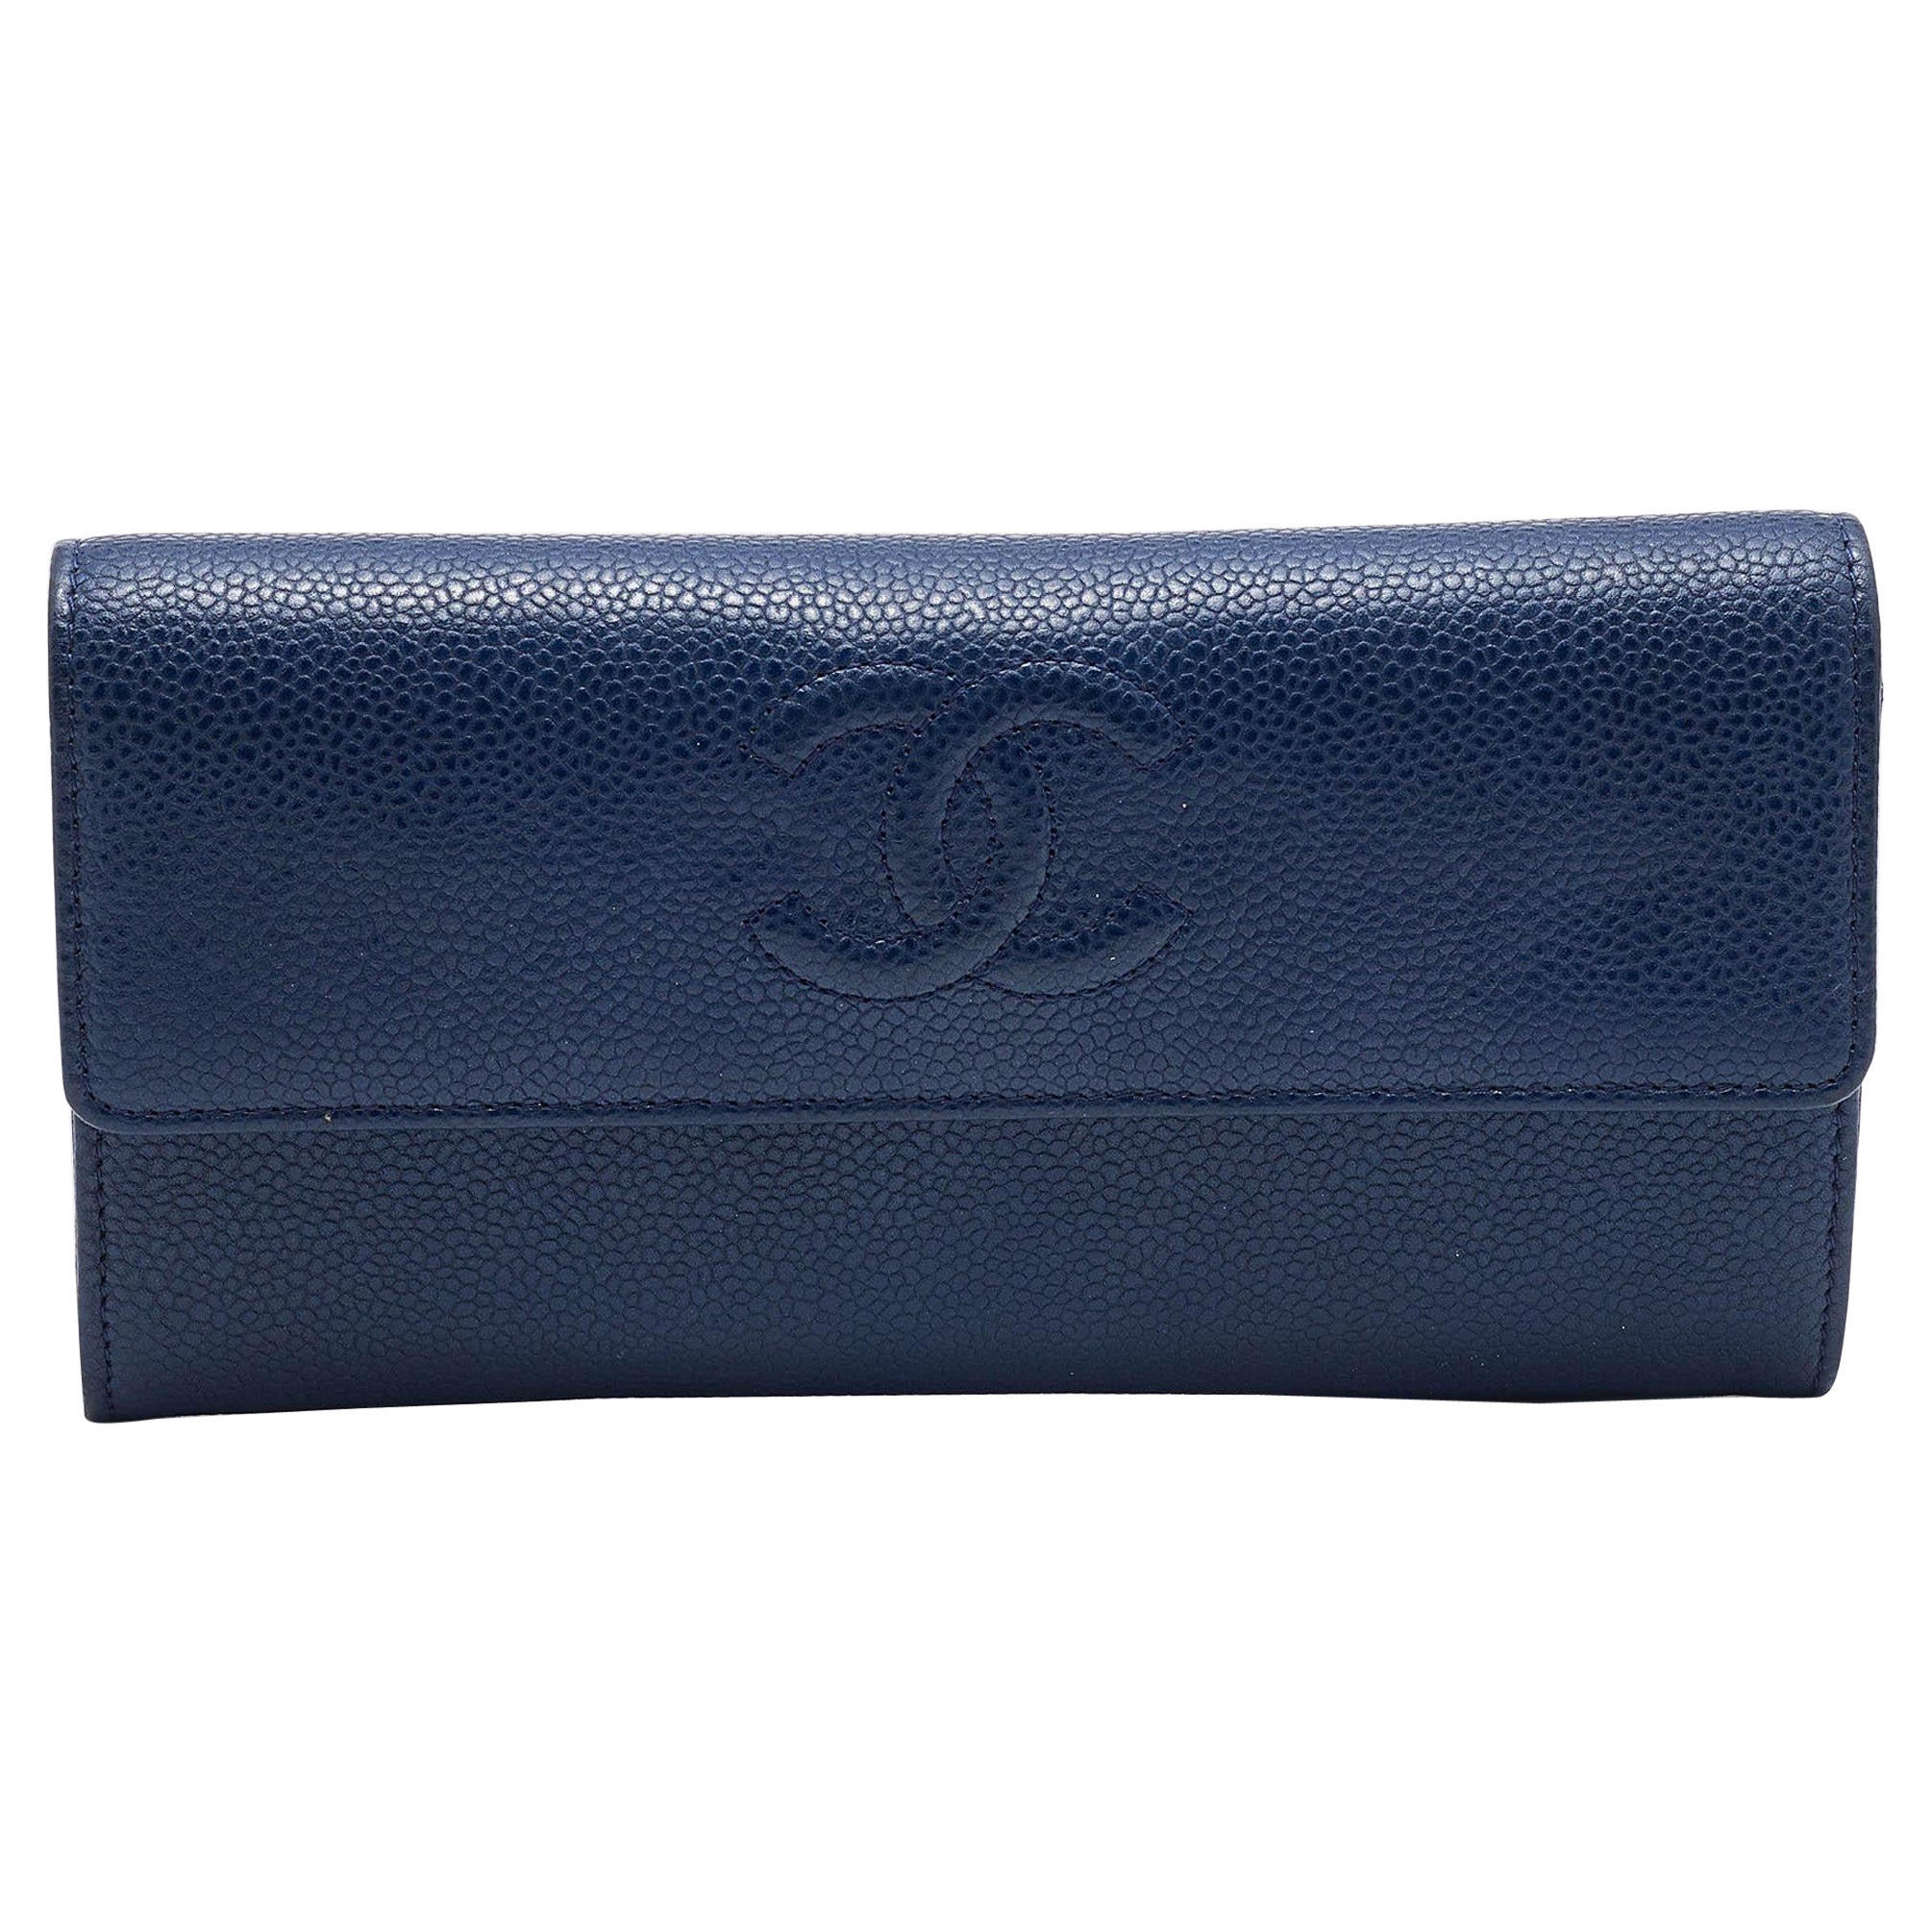 Chanel Blue Quilted Caviar Leather CC Flap Wallet